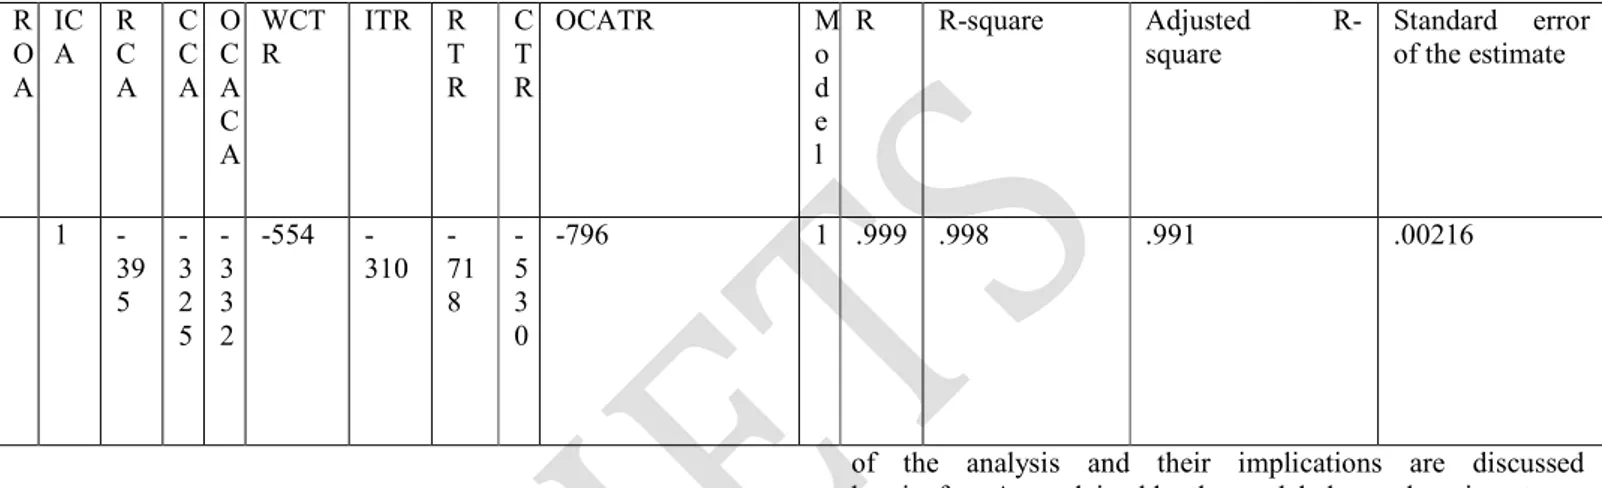 Table 5.1.a Current ratio (CR) and quick ratio (QR).  R O A  ICA  RC A  CC A  OCA C A  WCTR  ITR  RT R  CT R  OCATR  Model  R  R-square  Adjusted  R-square  Standard  error of the estimate  1   -39 5   -32 5   -33 2  -554   -310   -718   -53 0  -796  1  .9